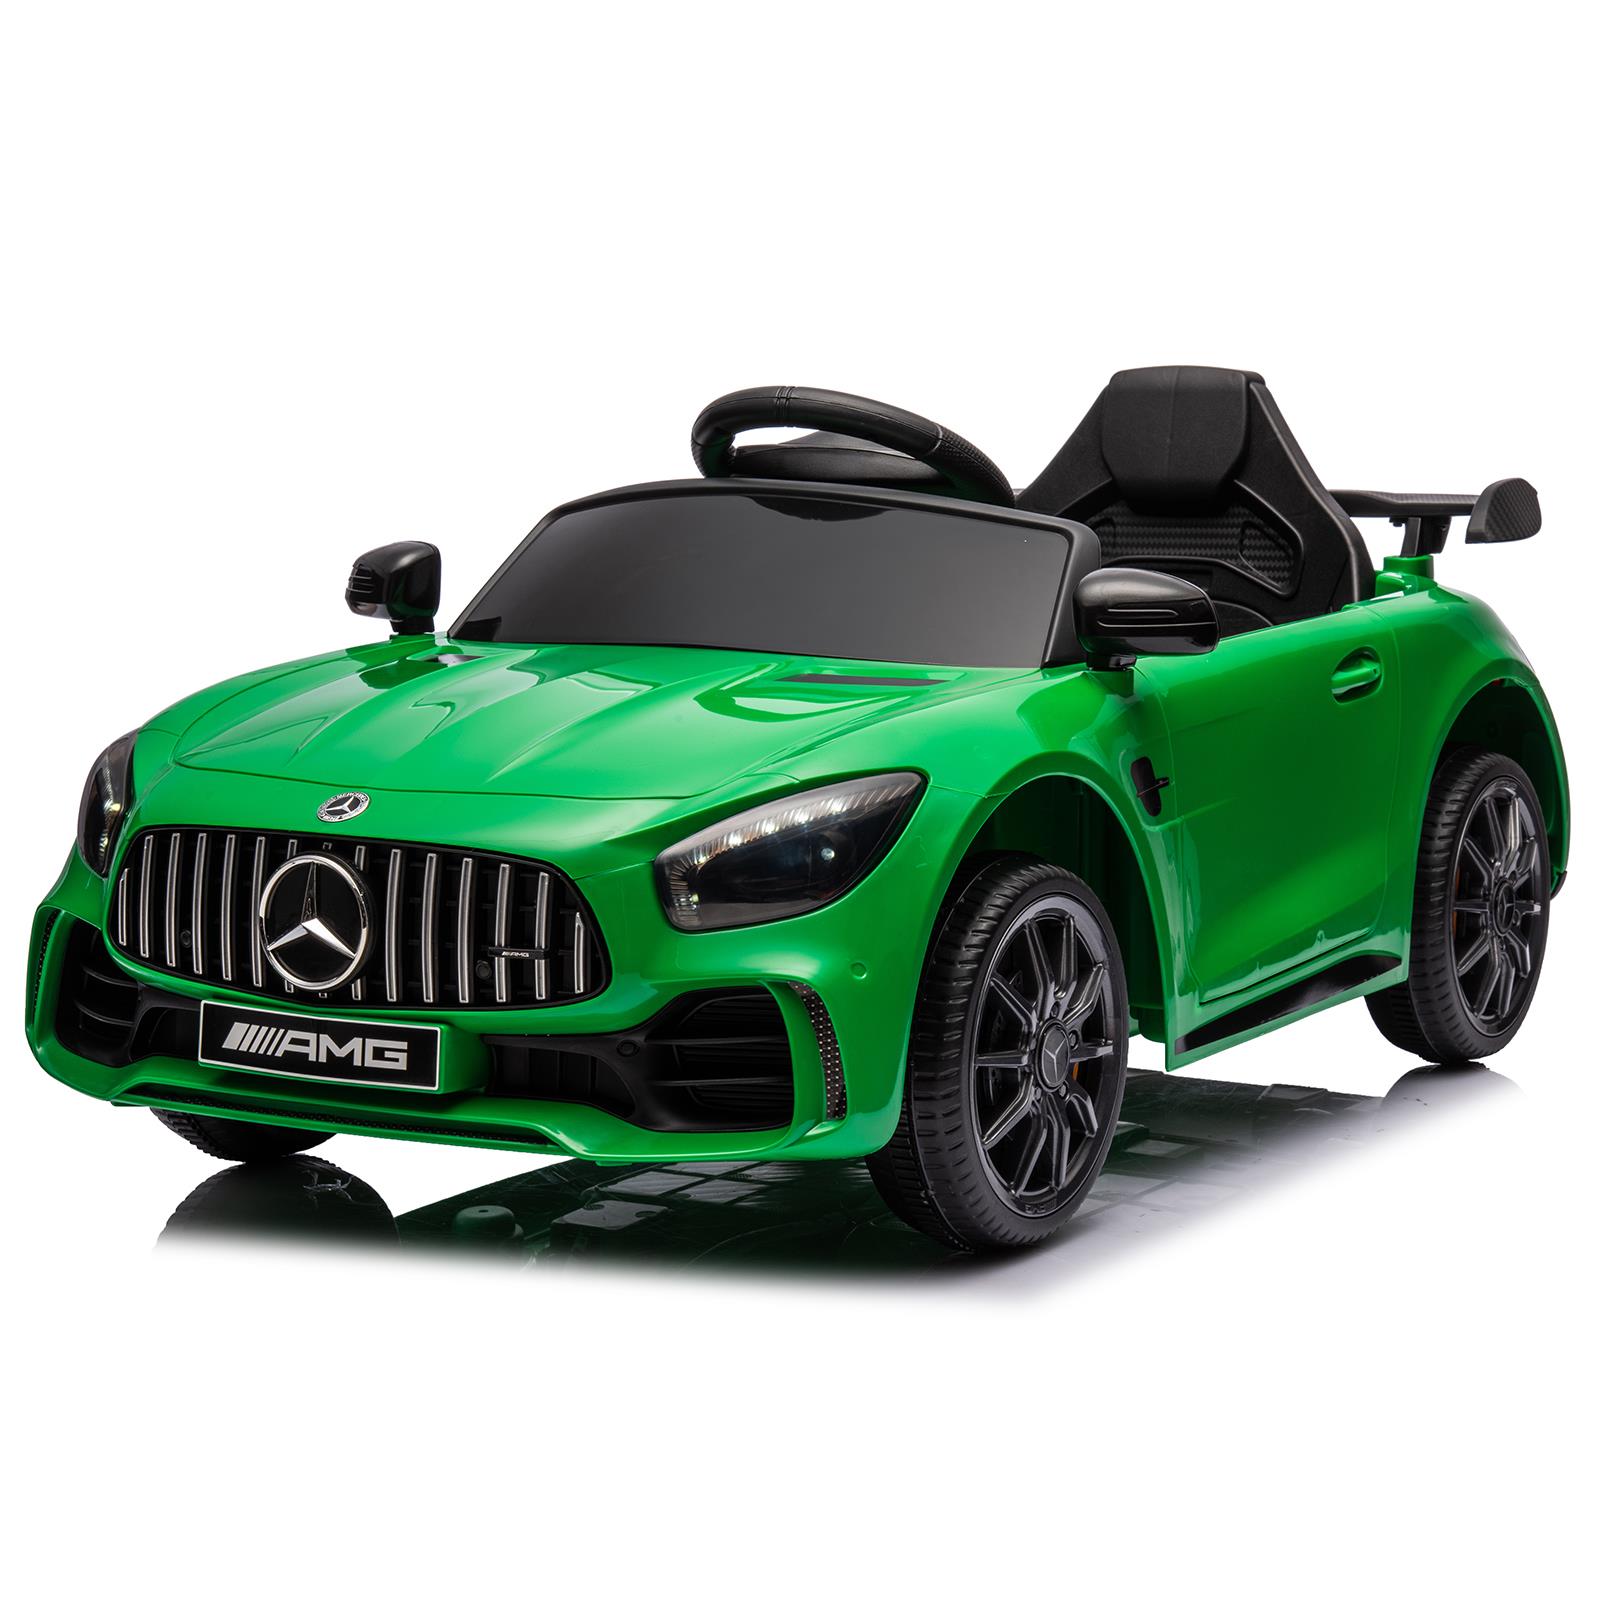 UBesGoo 12V Licensed Mercedes-Benz Electric Ride on Car Toy for Toddler Kid w/ Remote Control, LED Lights, Green - image 1 of 9